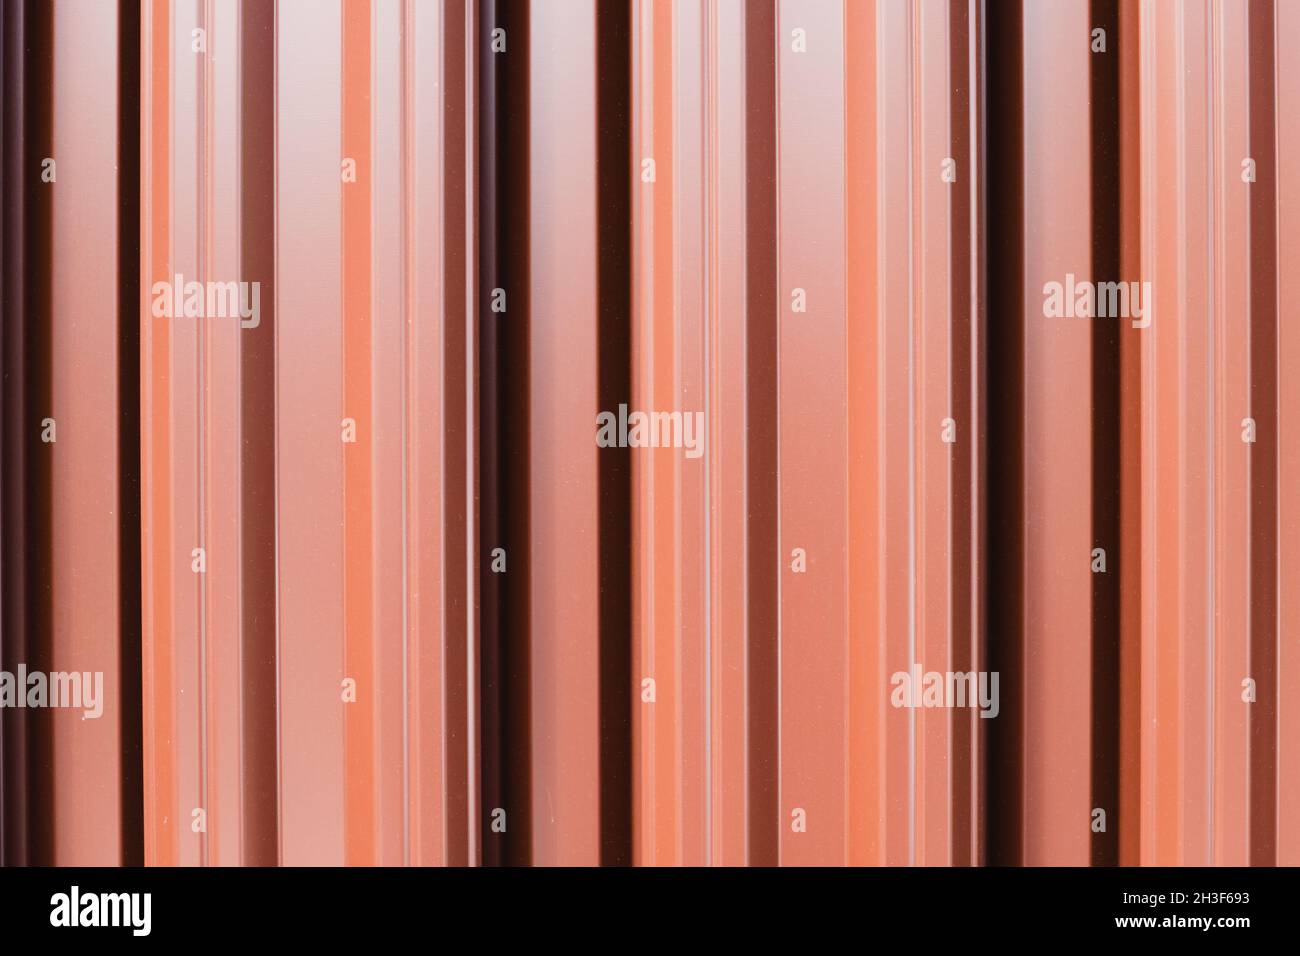 Shiny fence made of red metal planks, abstract background photo texture Stock Photo